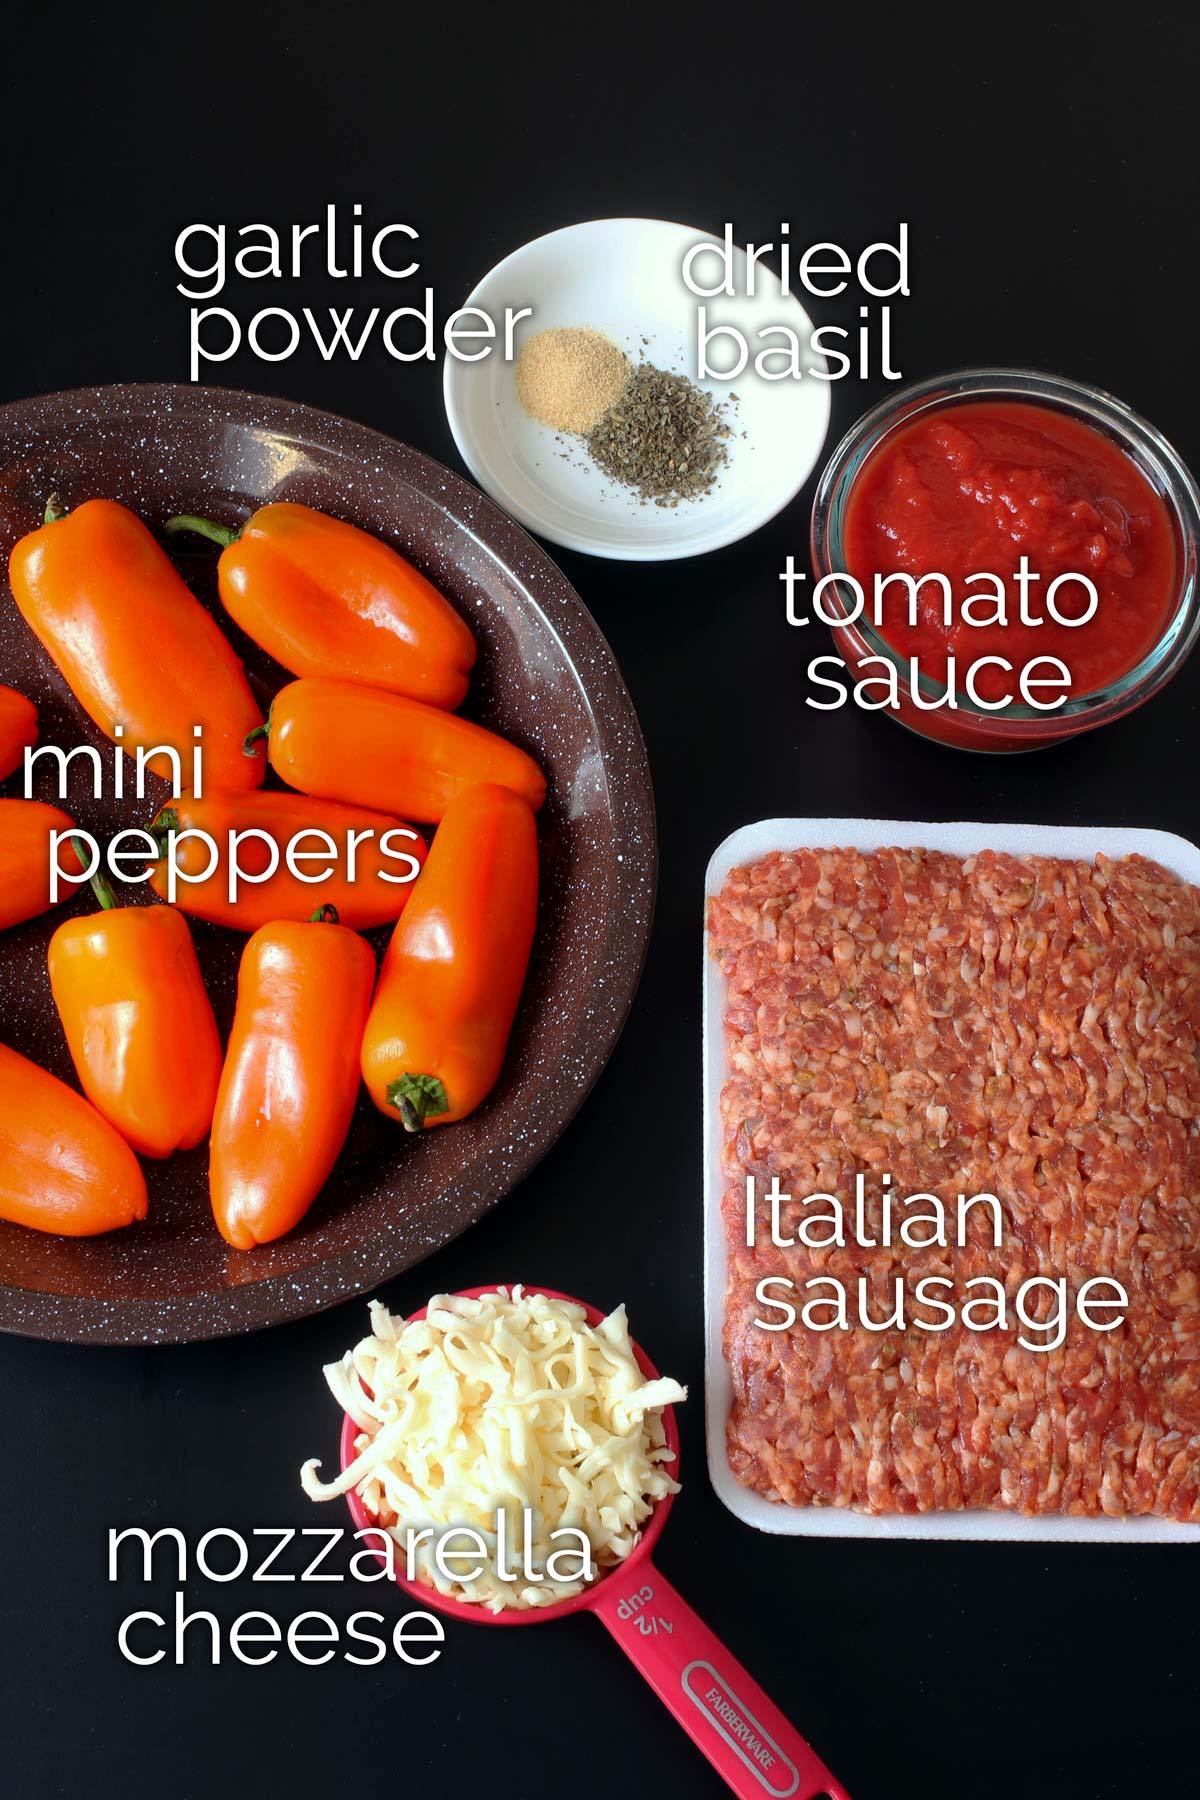 ingredients for stuffed mini peppers on black table.